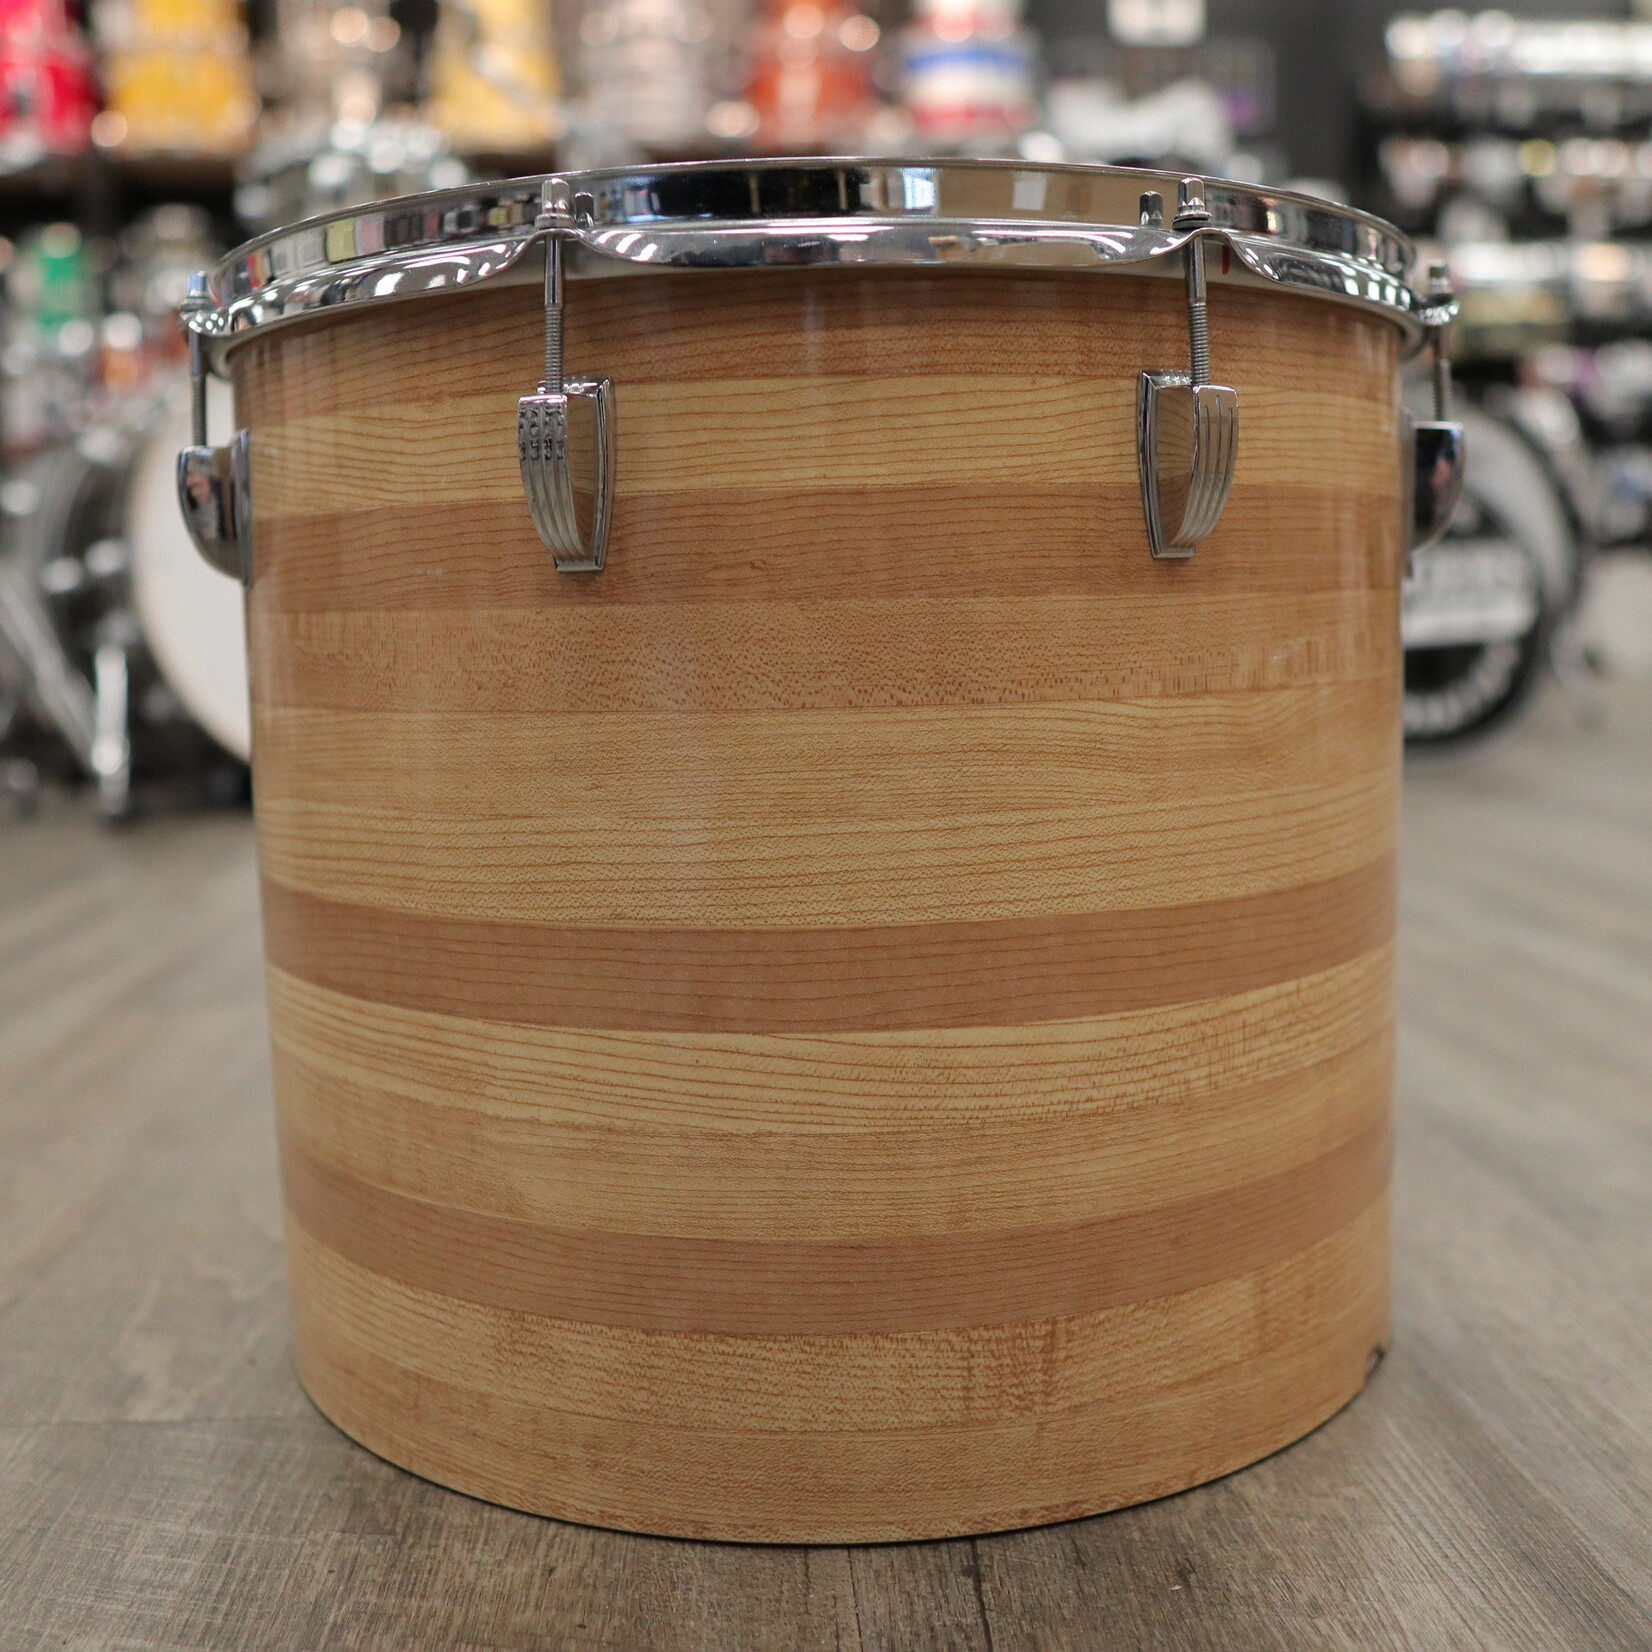 Ludwig 70s Ludwig 14x16" 3-Ply Concert Tom Blue/Olive Pointy Badge (Butcher Block)